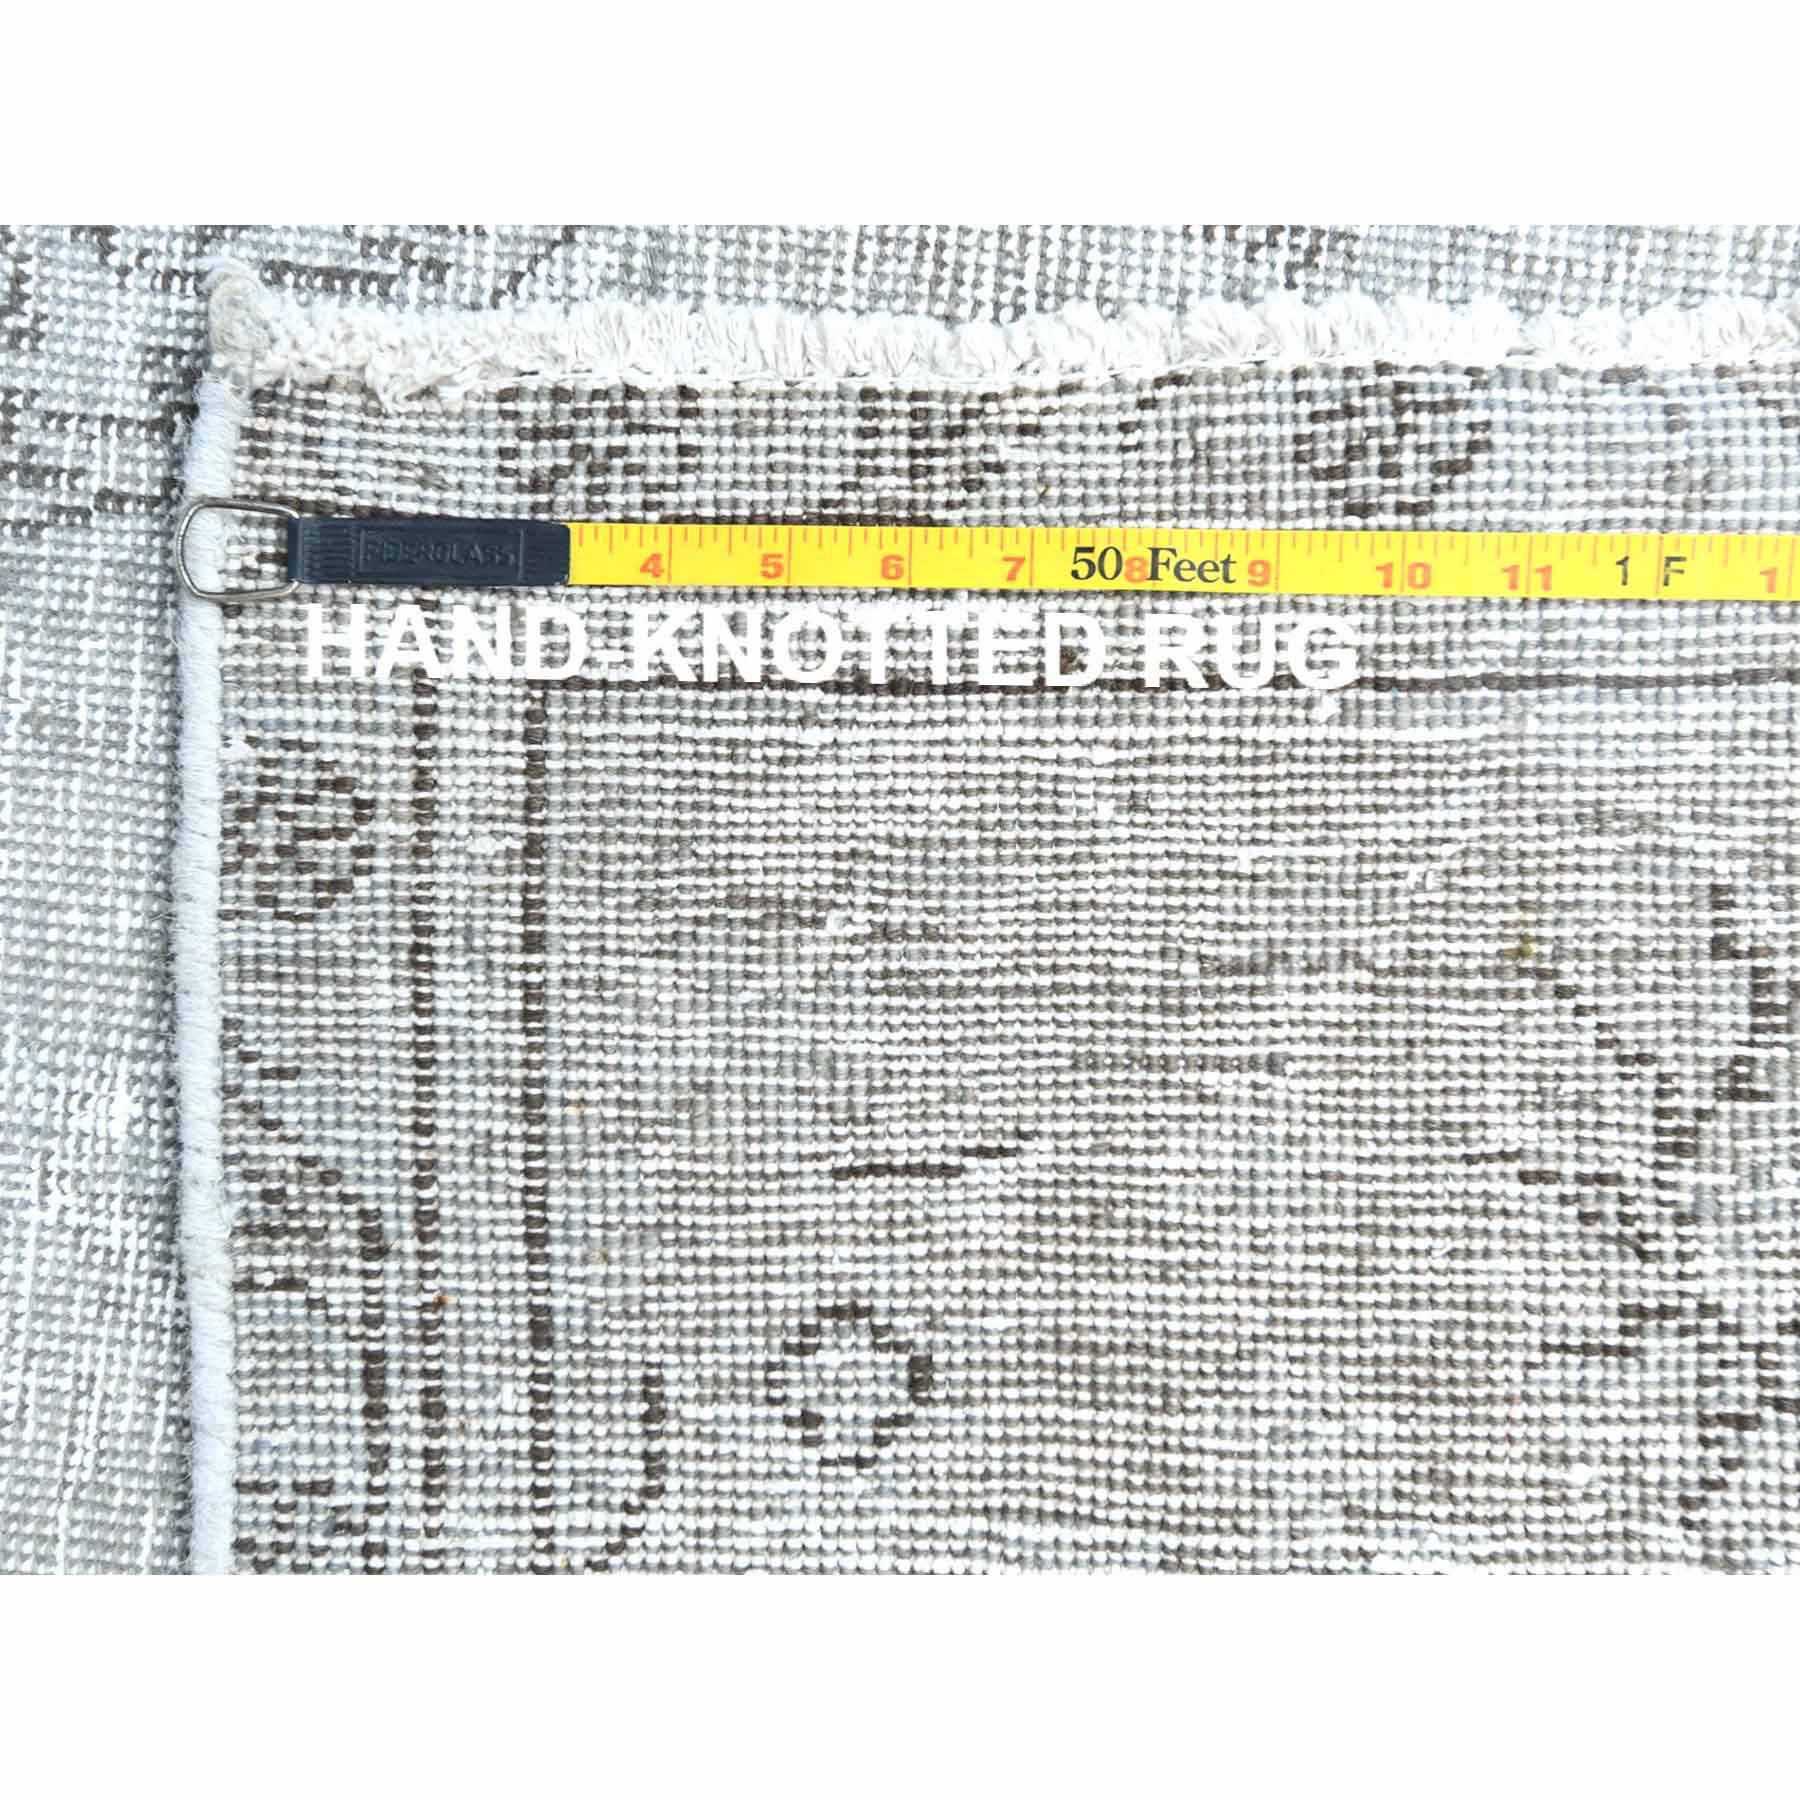 Overdyed-Vintage-Hand-Knotted-Rug-408520